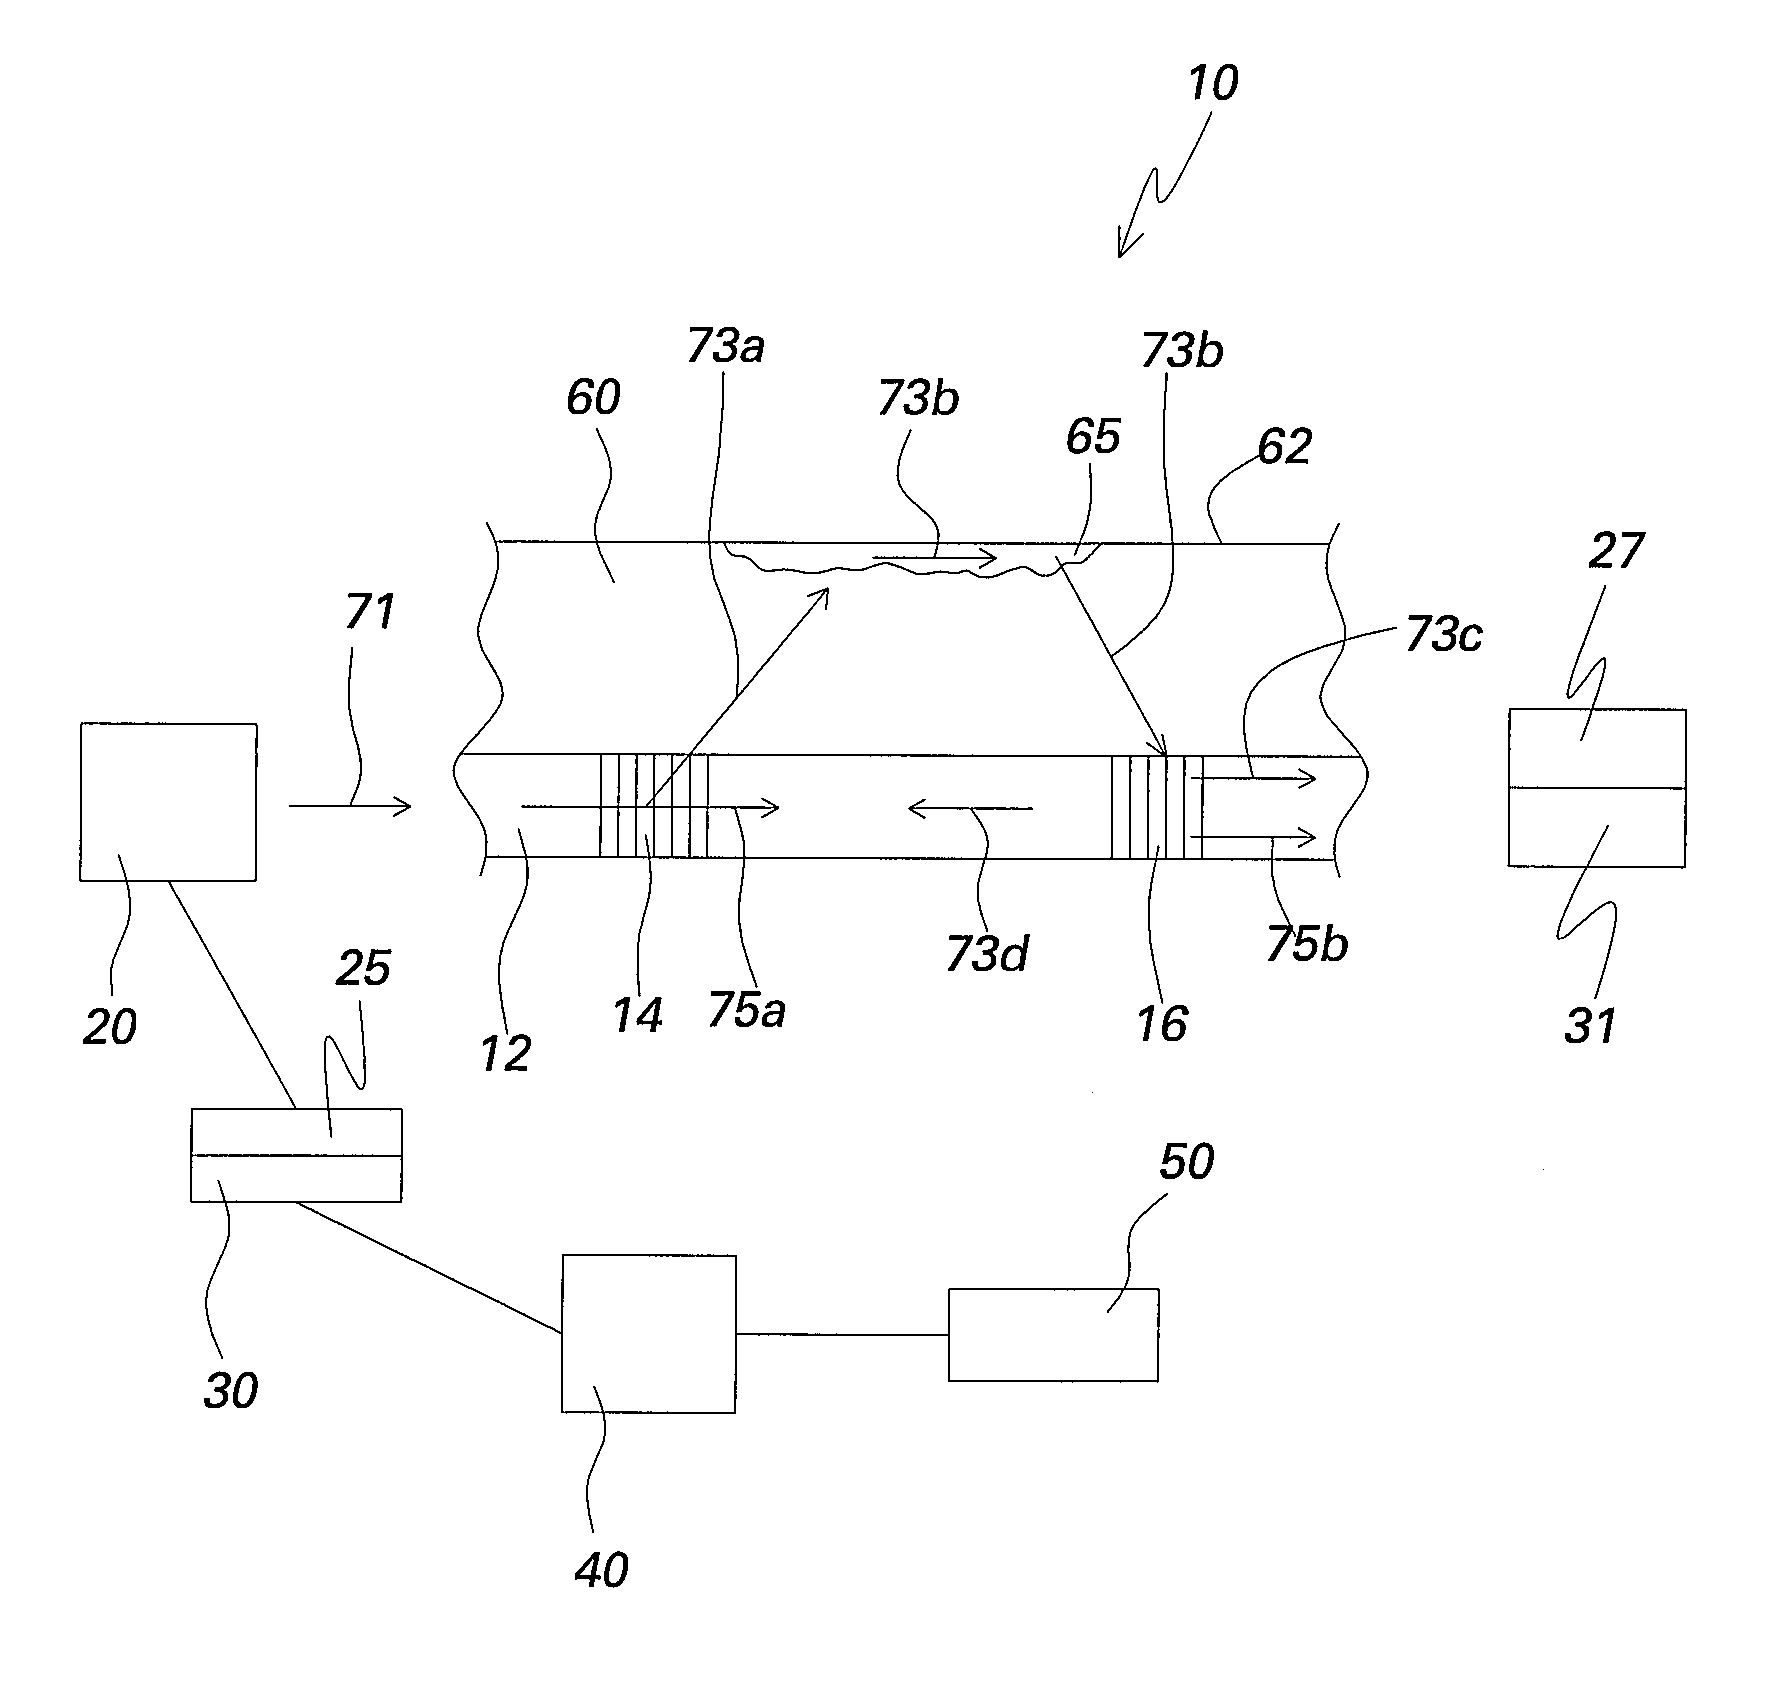 Interferometer-based real time early fouling detection system and method